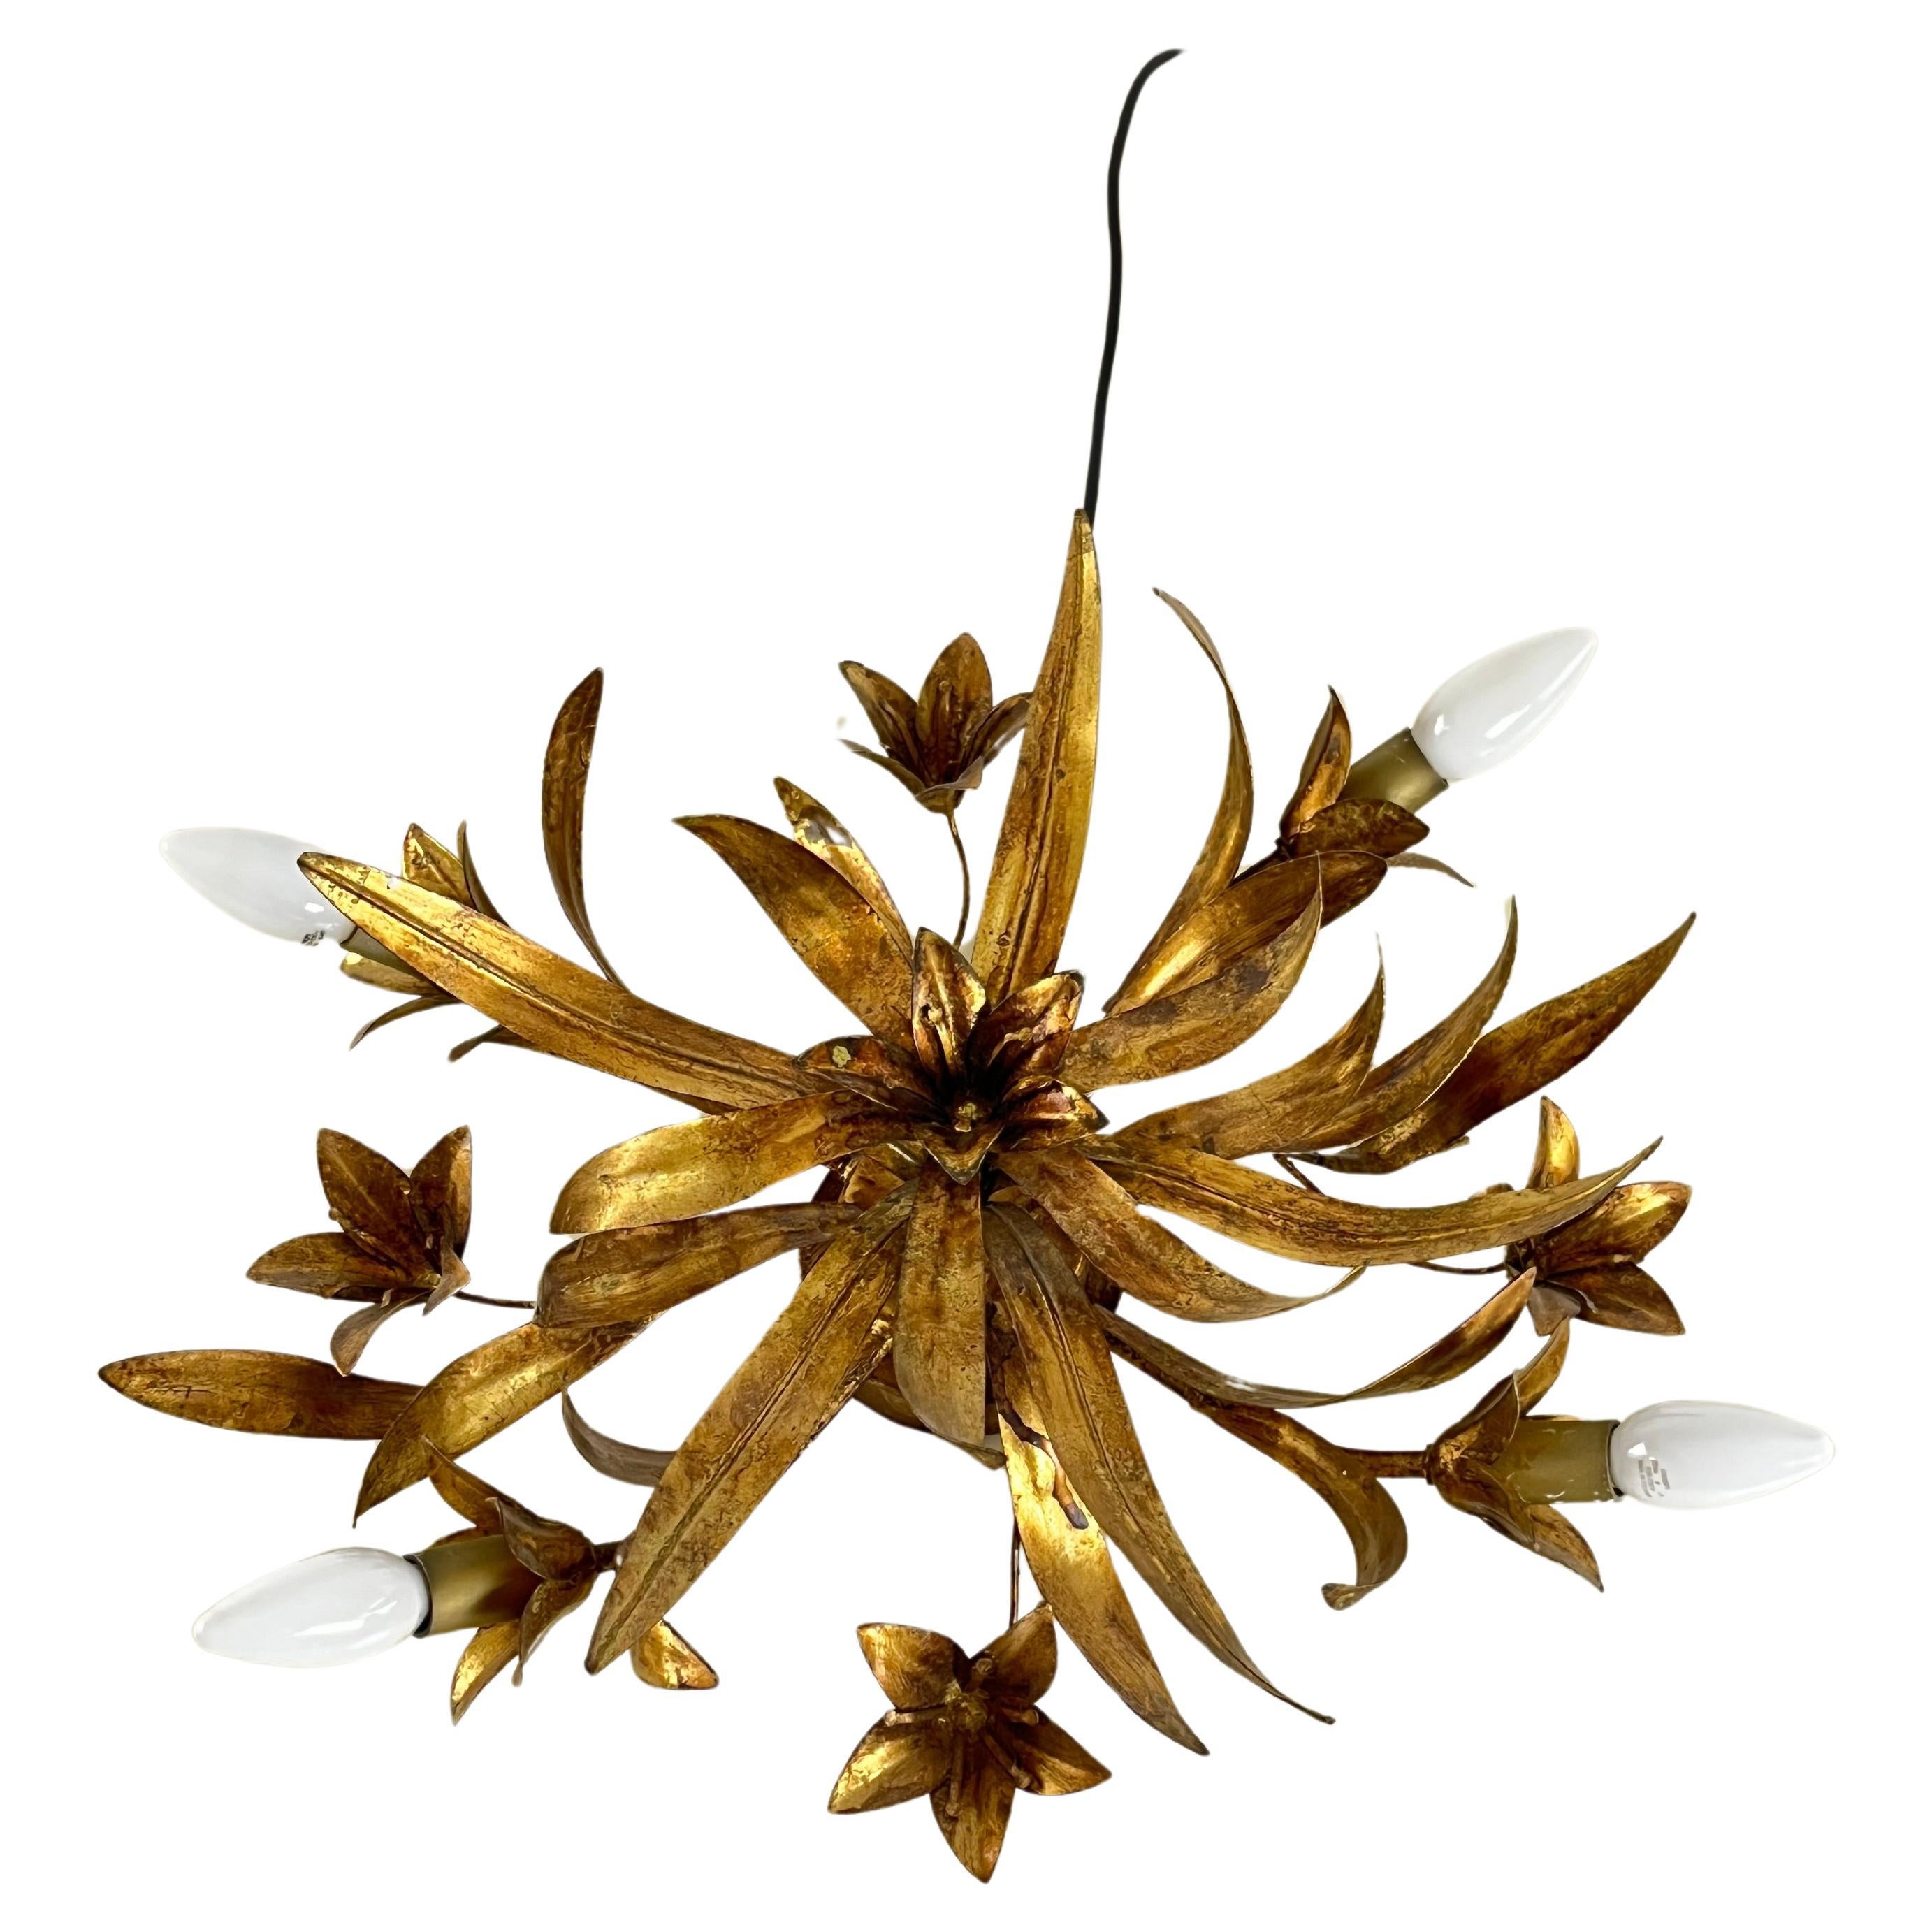 Florentine 4-Light Golden Iron Ceiling Light In The Style of Banci  1980s  For Sale